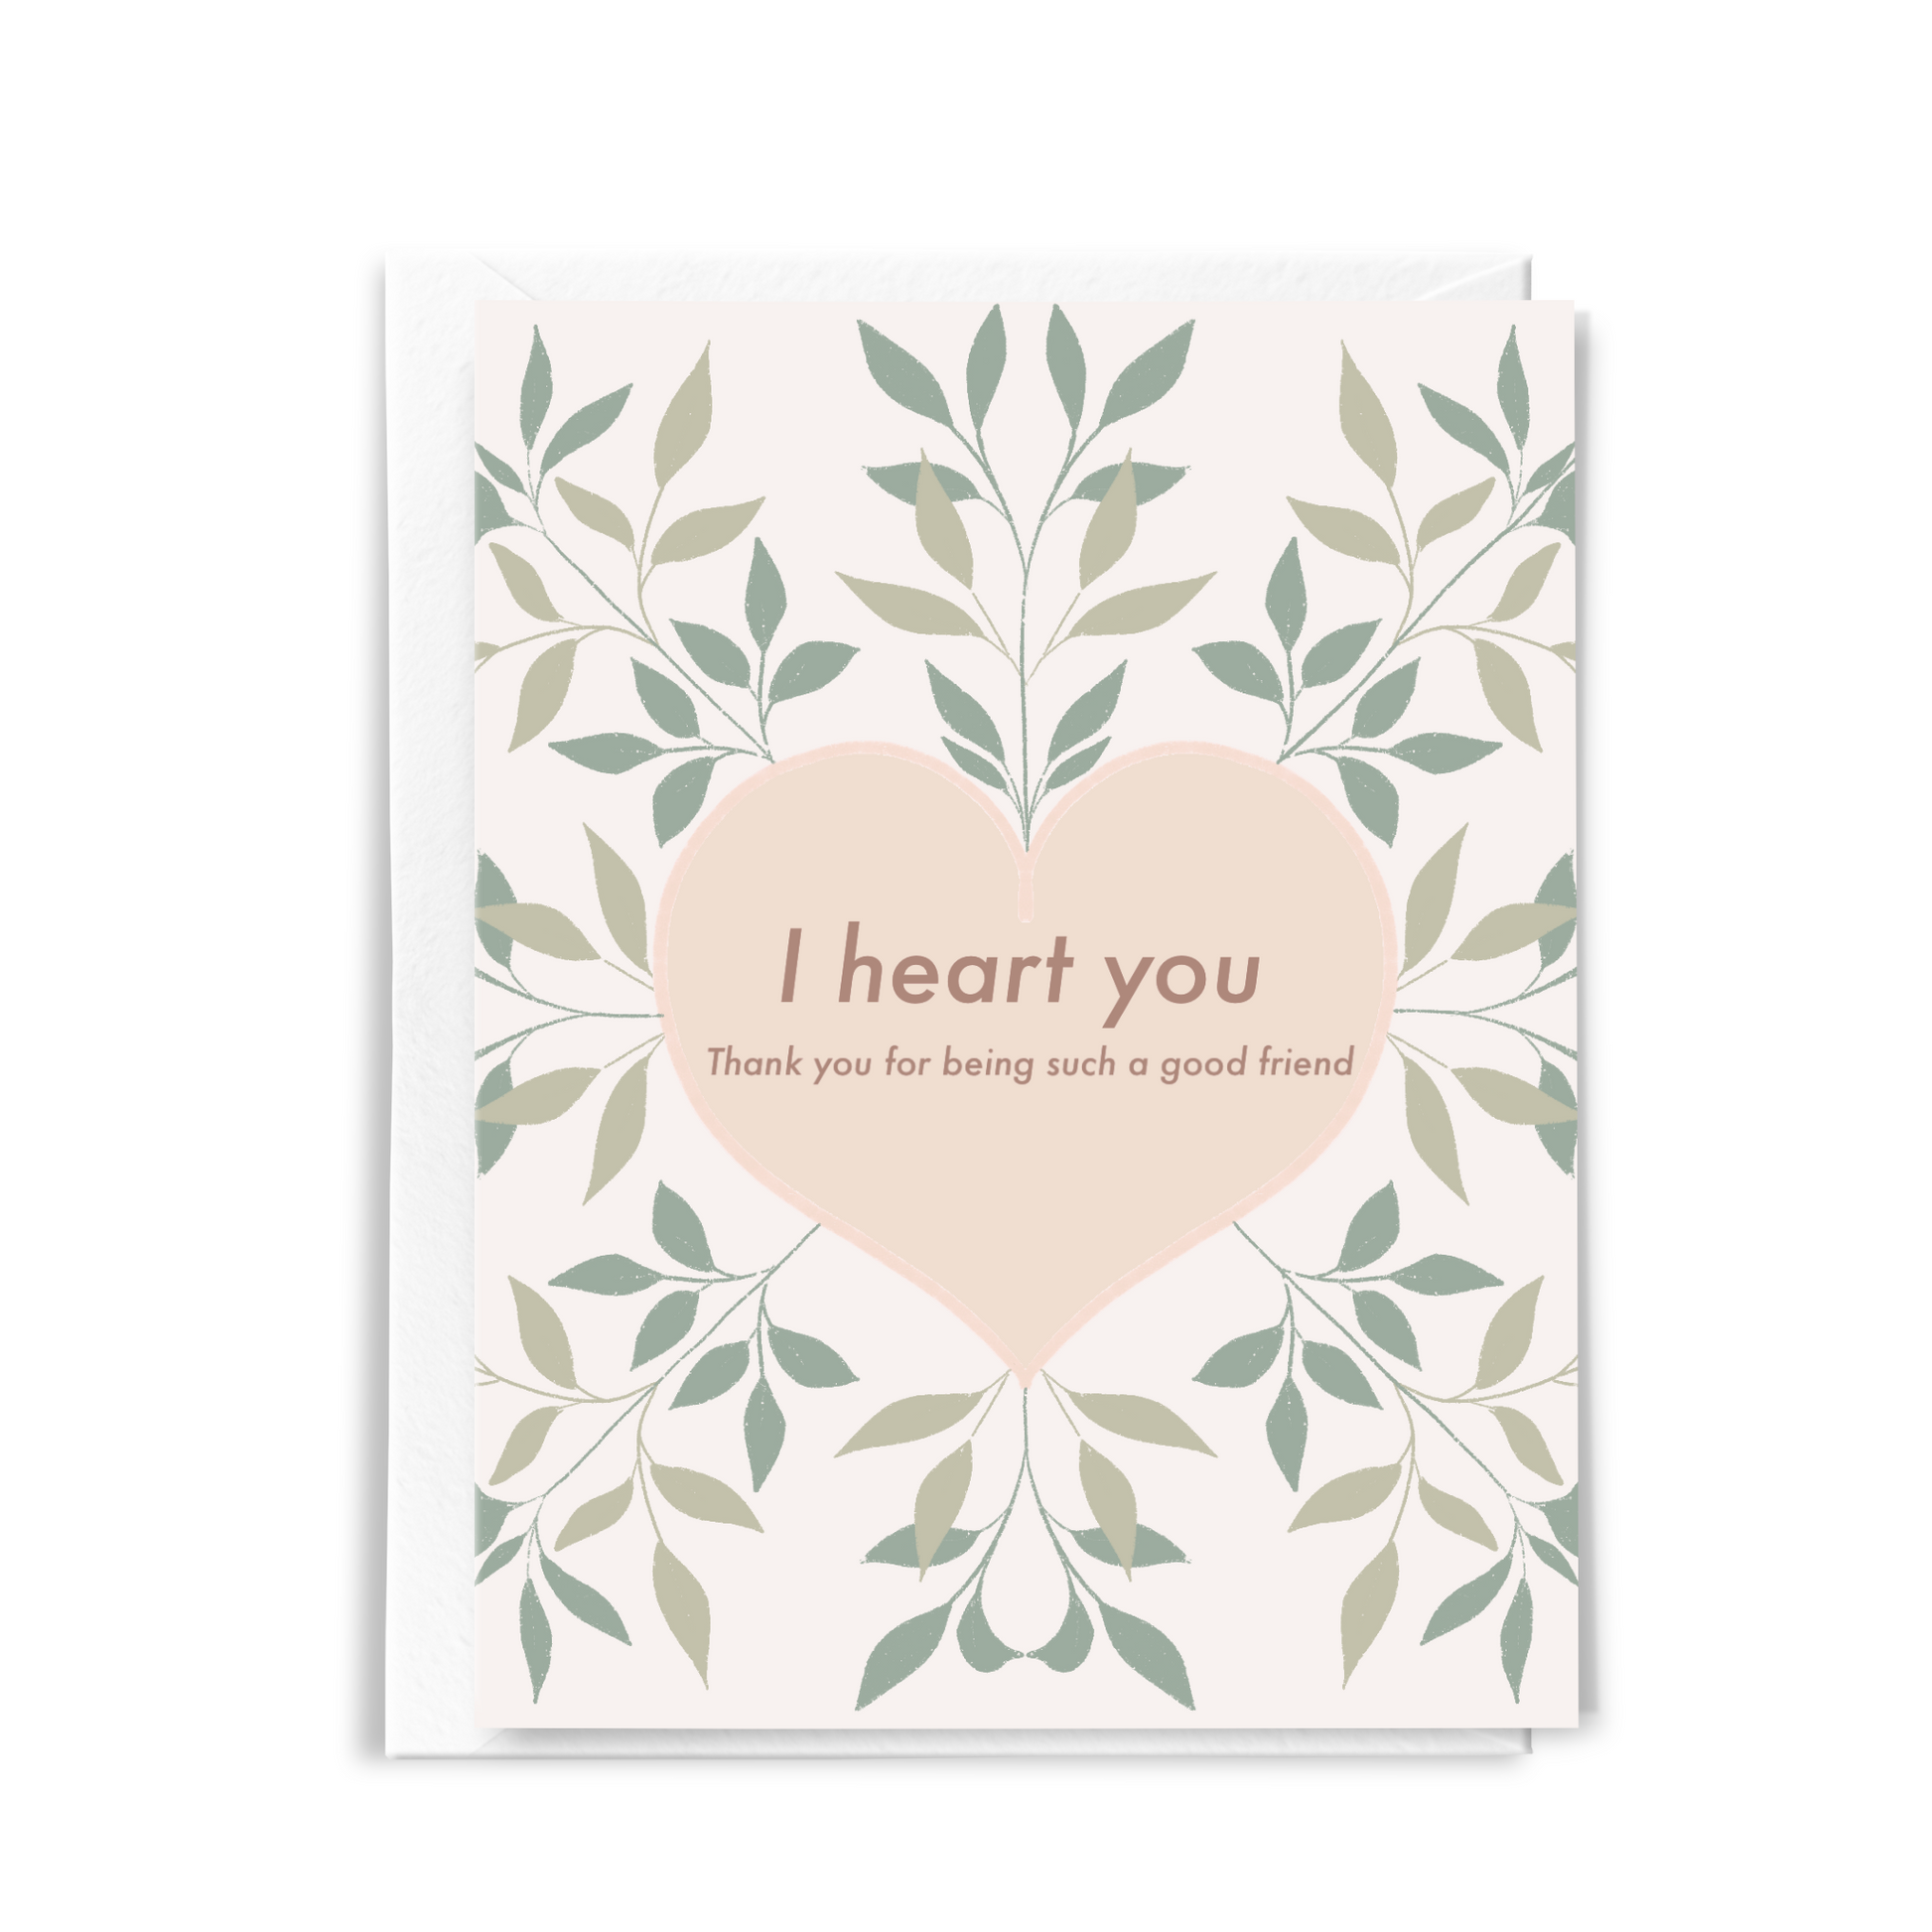 sweet friendship card with heart in center and floral border